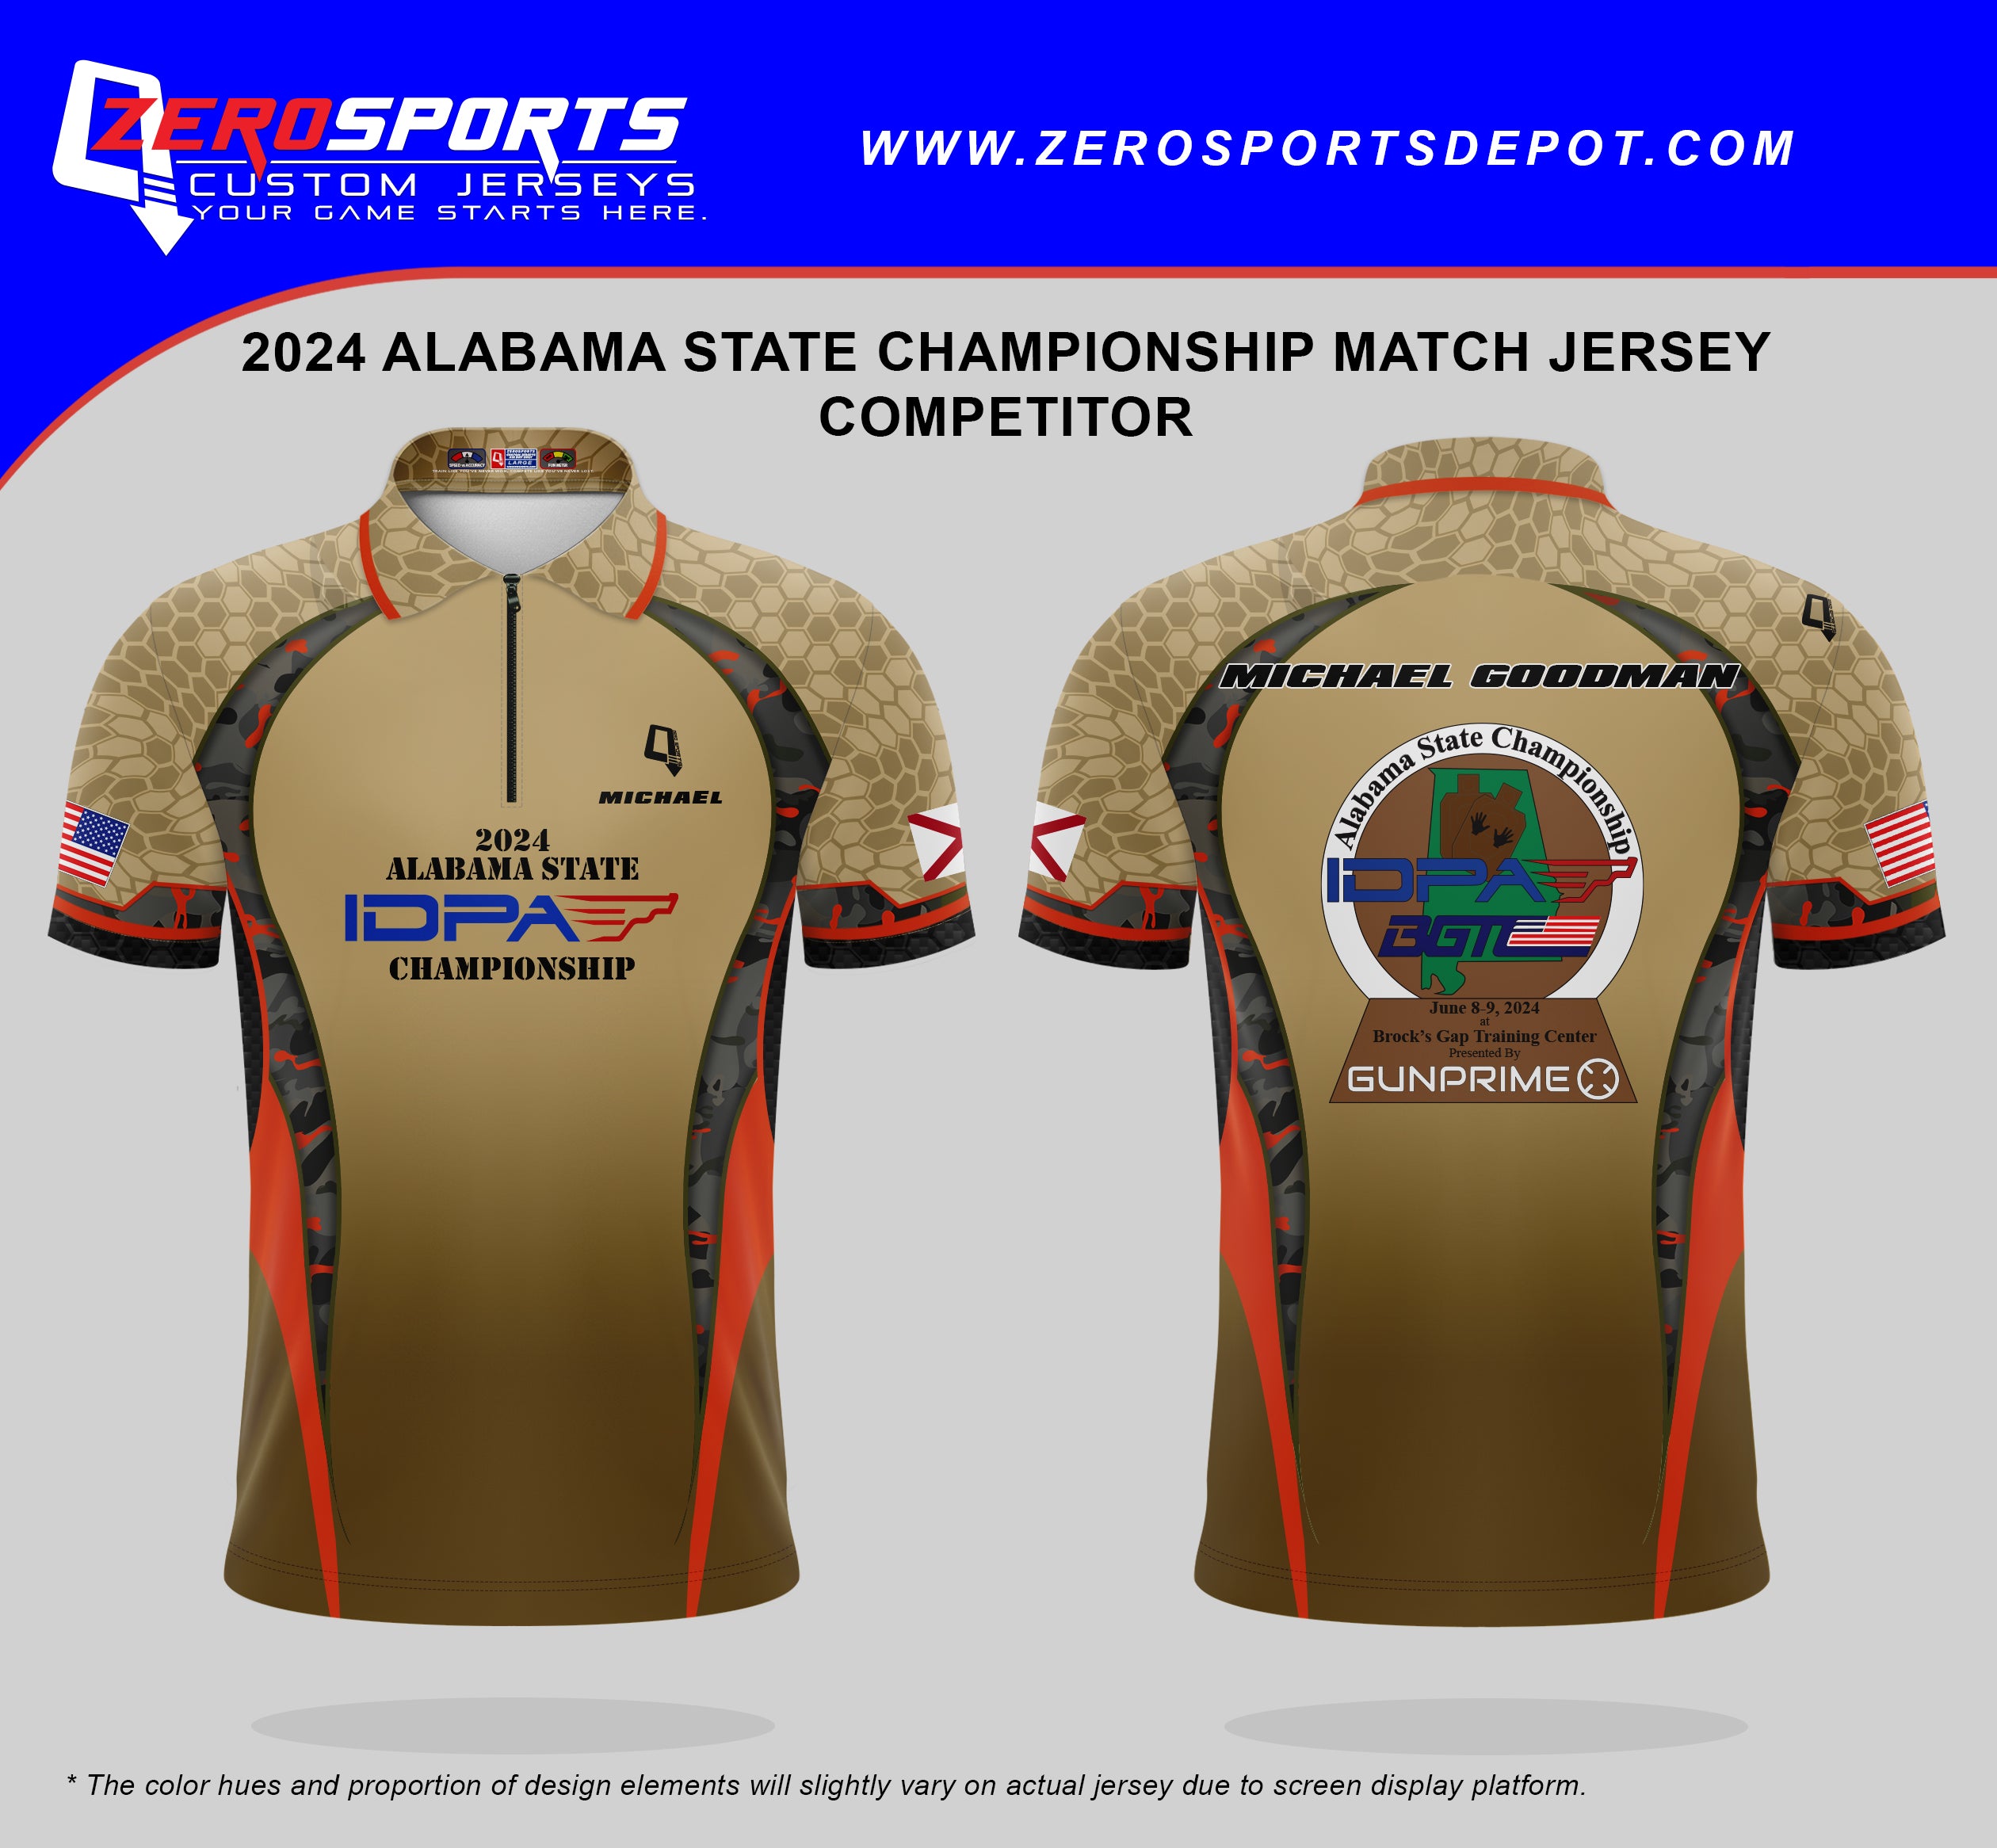 2024 Alabama State IDPA Championship Match Jersey  **All orders after 4/22/2024 will be shipped directly to your address after the match.